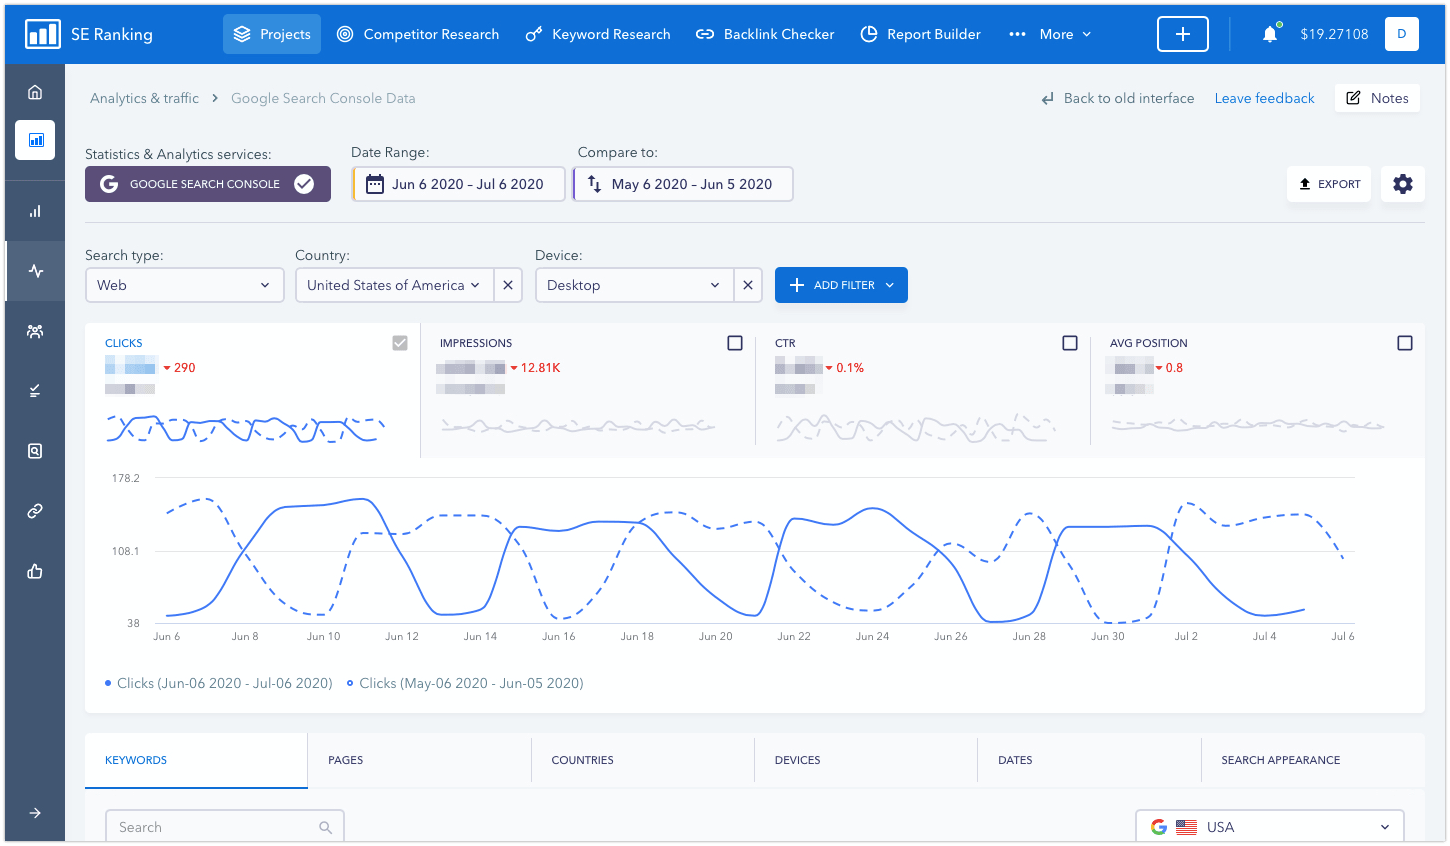 Redesigned GSC data in Analytics and traffic